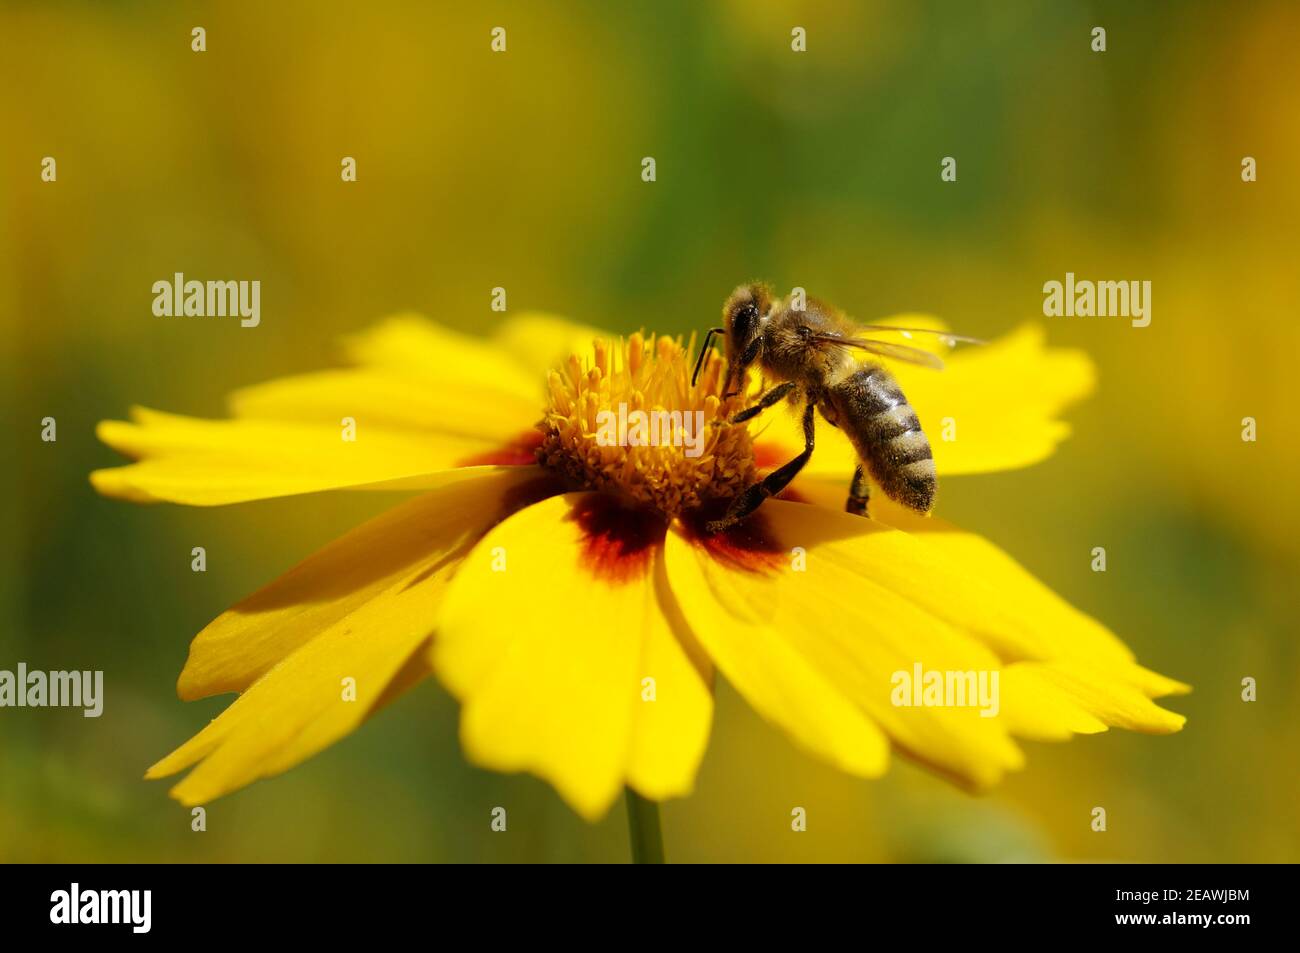 European honey bee sitting and pollinating on yellow large-flowered tickseed blossom Stock Photo